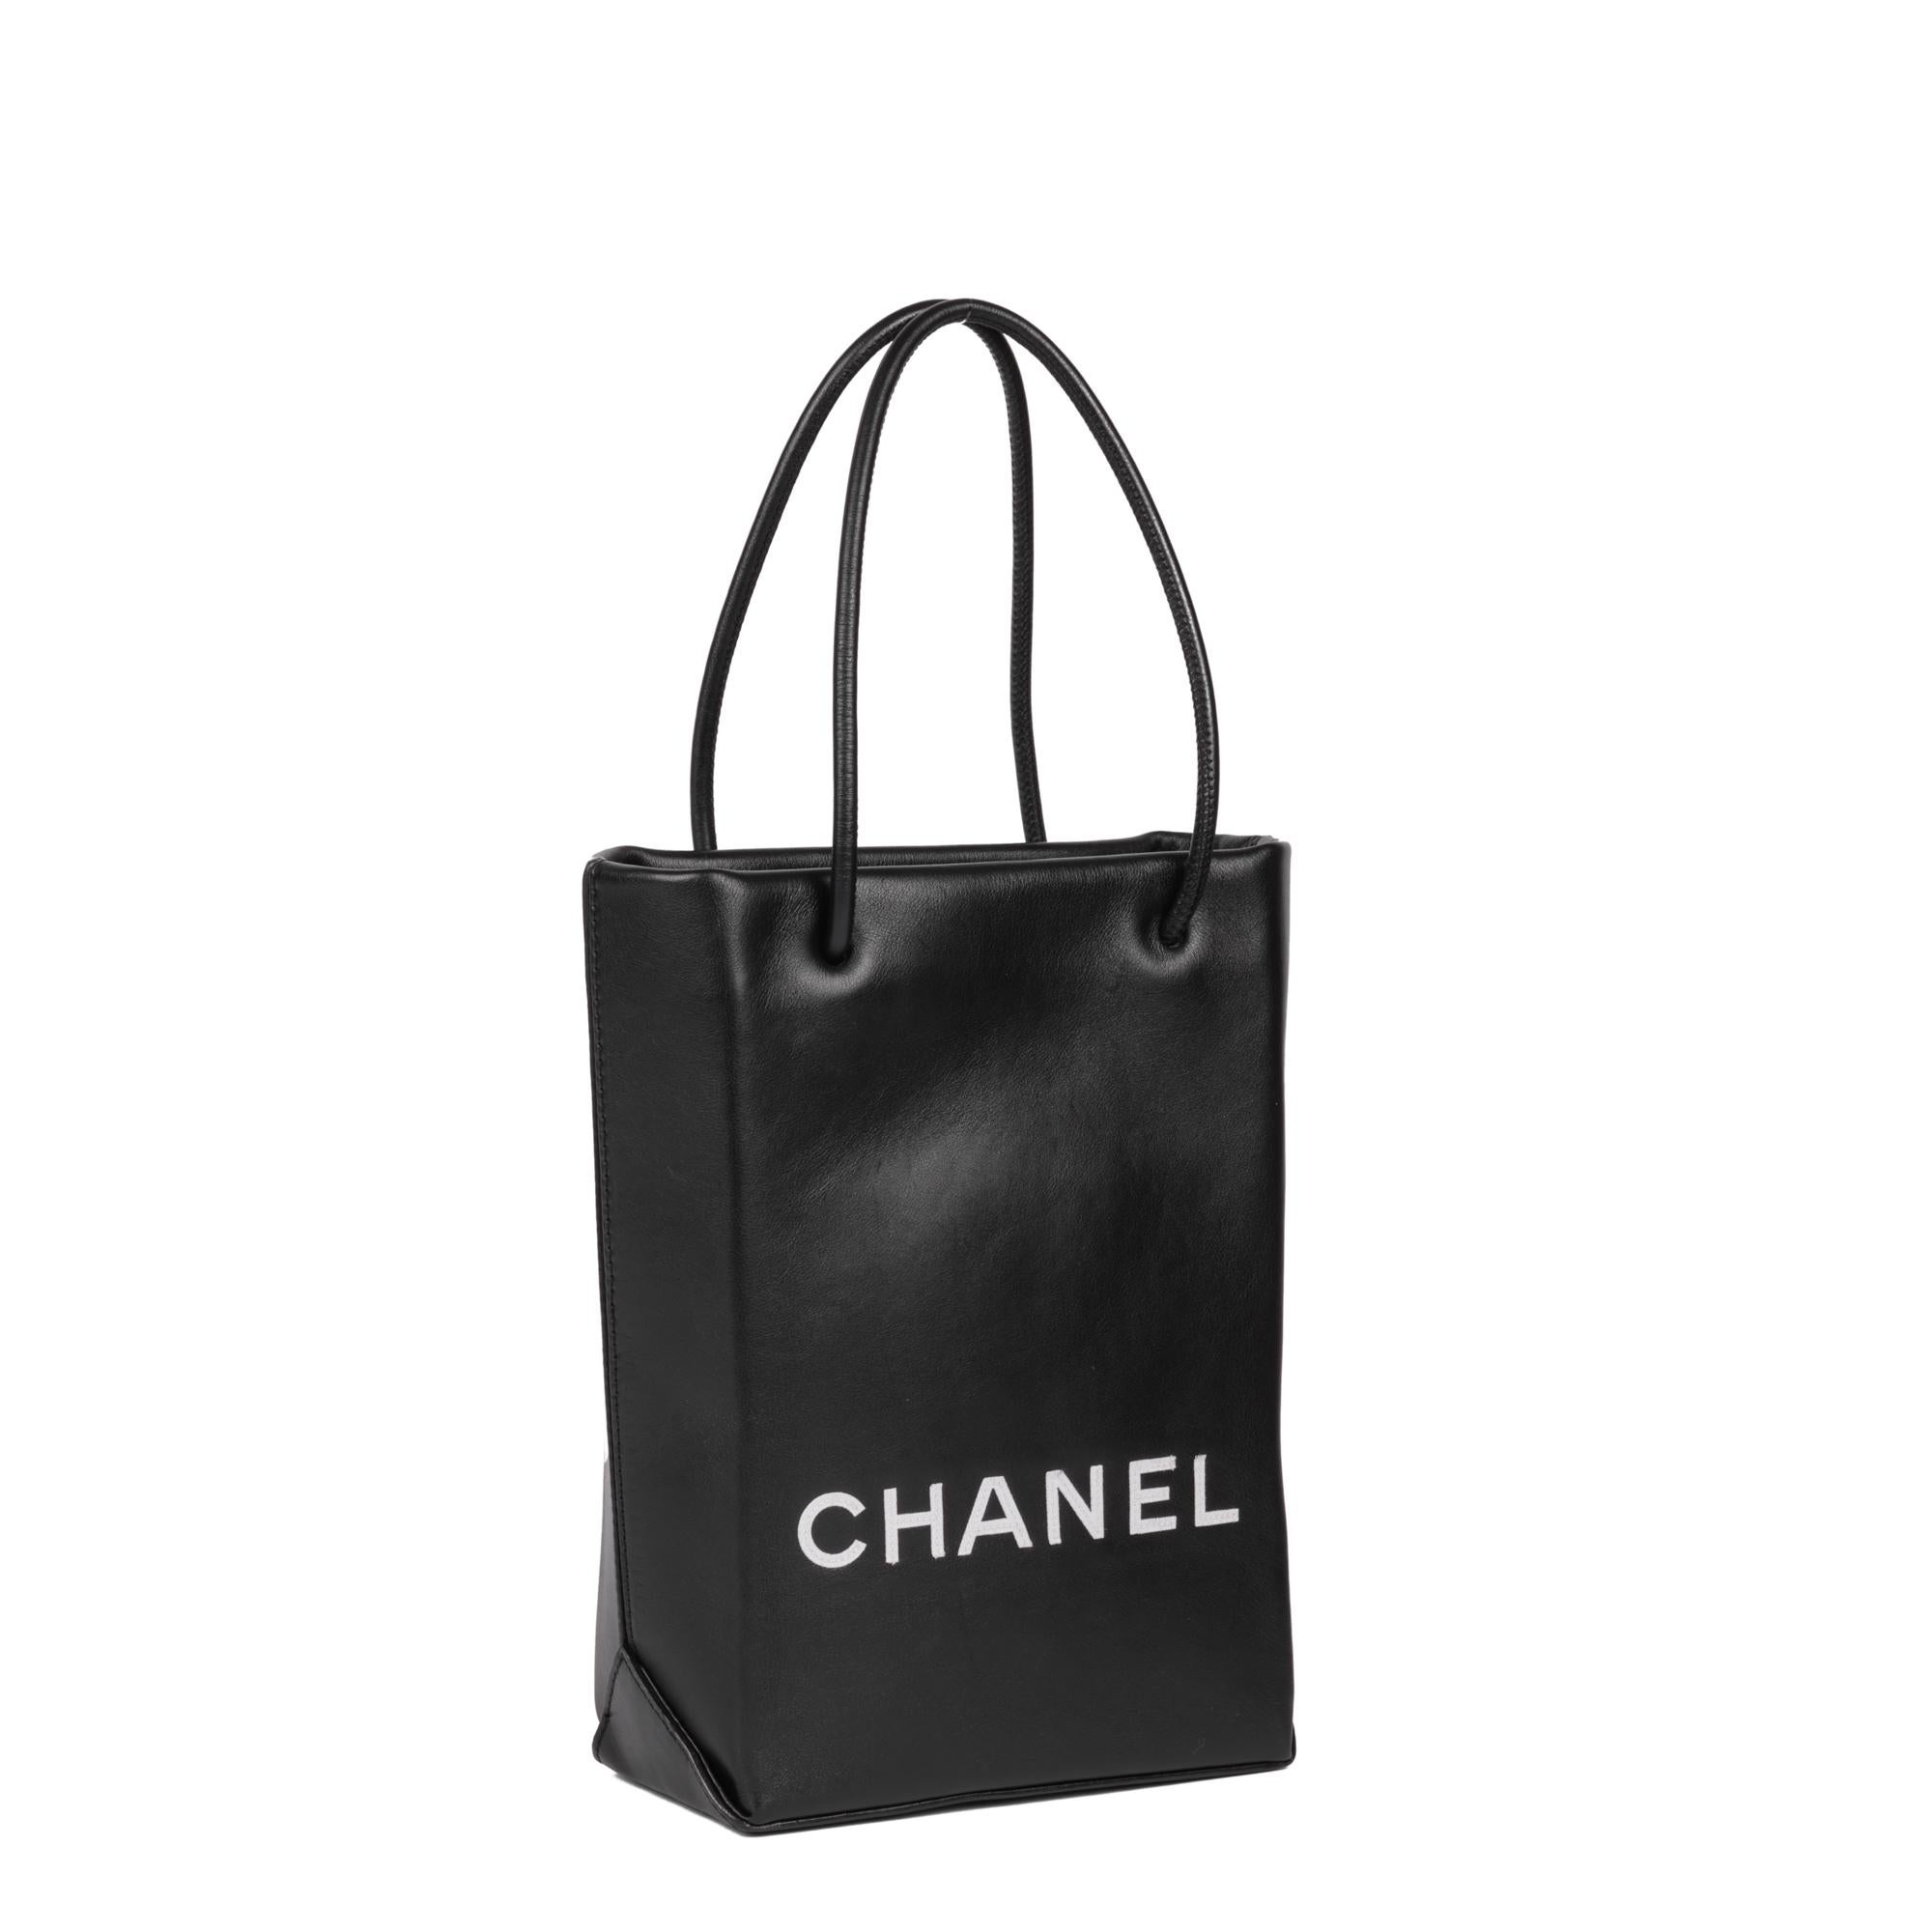 CHANEL
Black & White Lambskin Mini Shopping Bag Tote

Serial Number: 12792574
Age (Circa): 2008
Accompanied By: Chanel Dust Bag, Authenticity Card, Care Booklet
Authenticity Details: Authenticity Card, Serial Sticker (Made in Italy)
Gender: